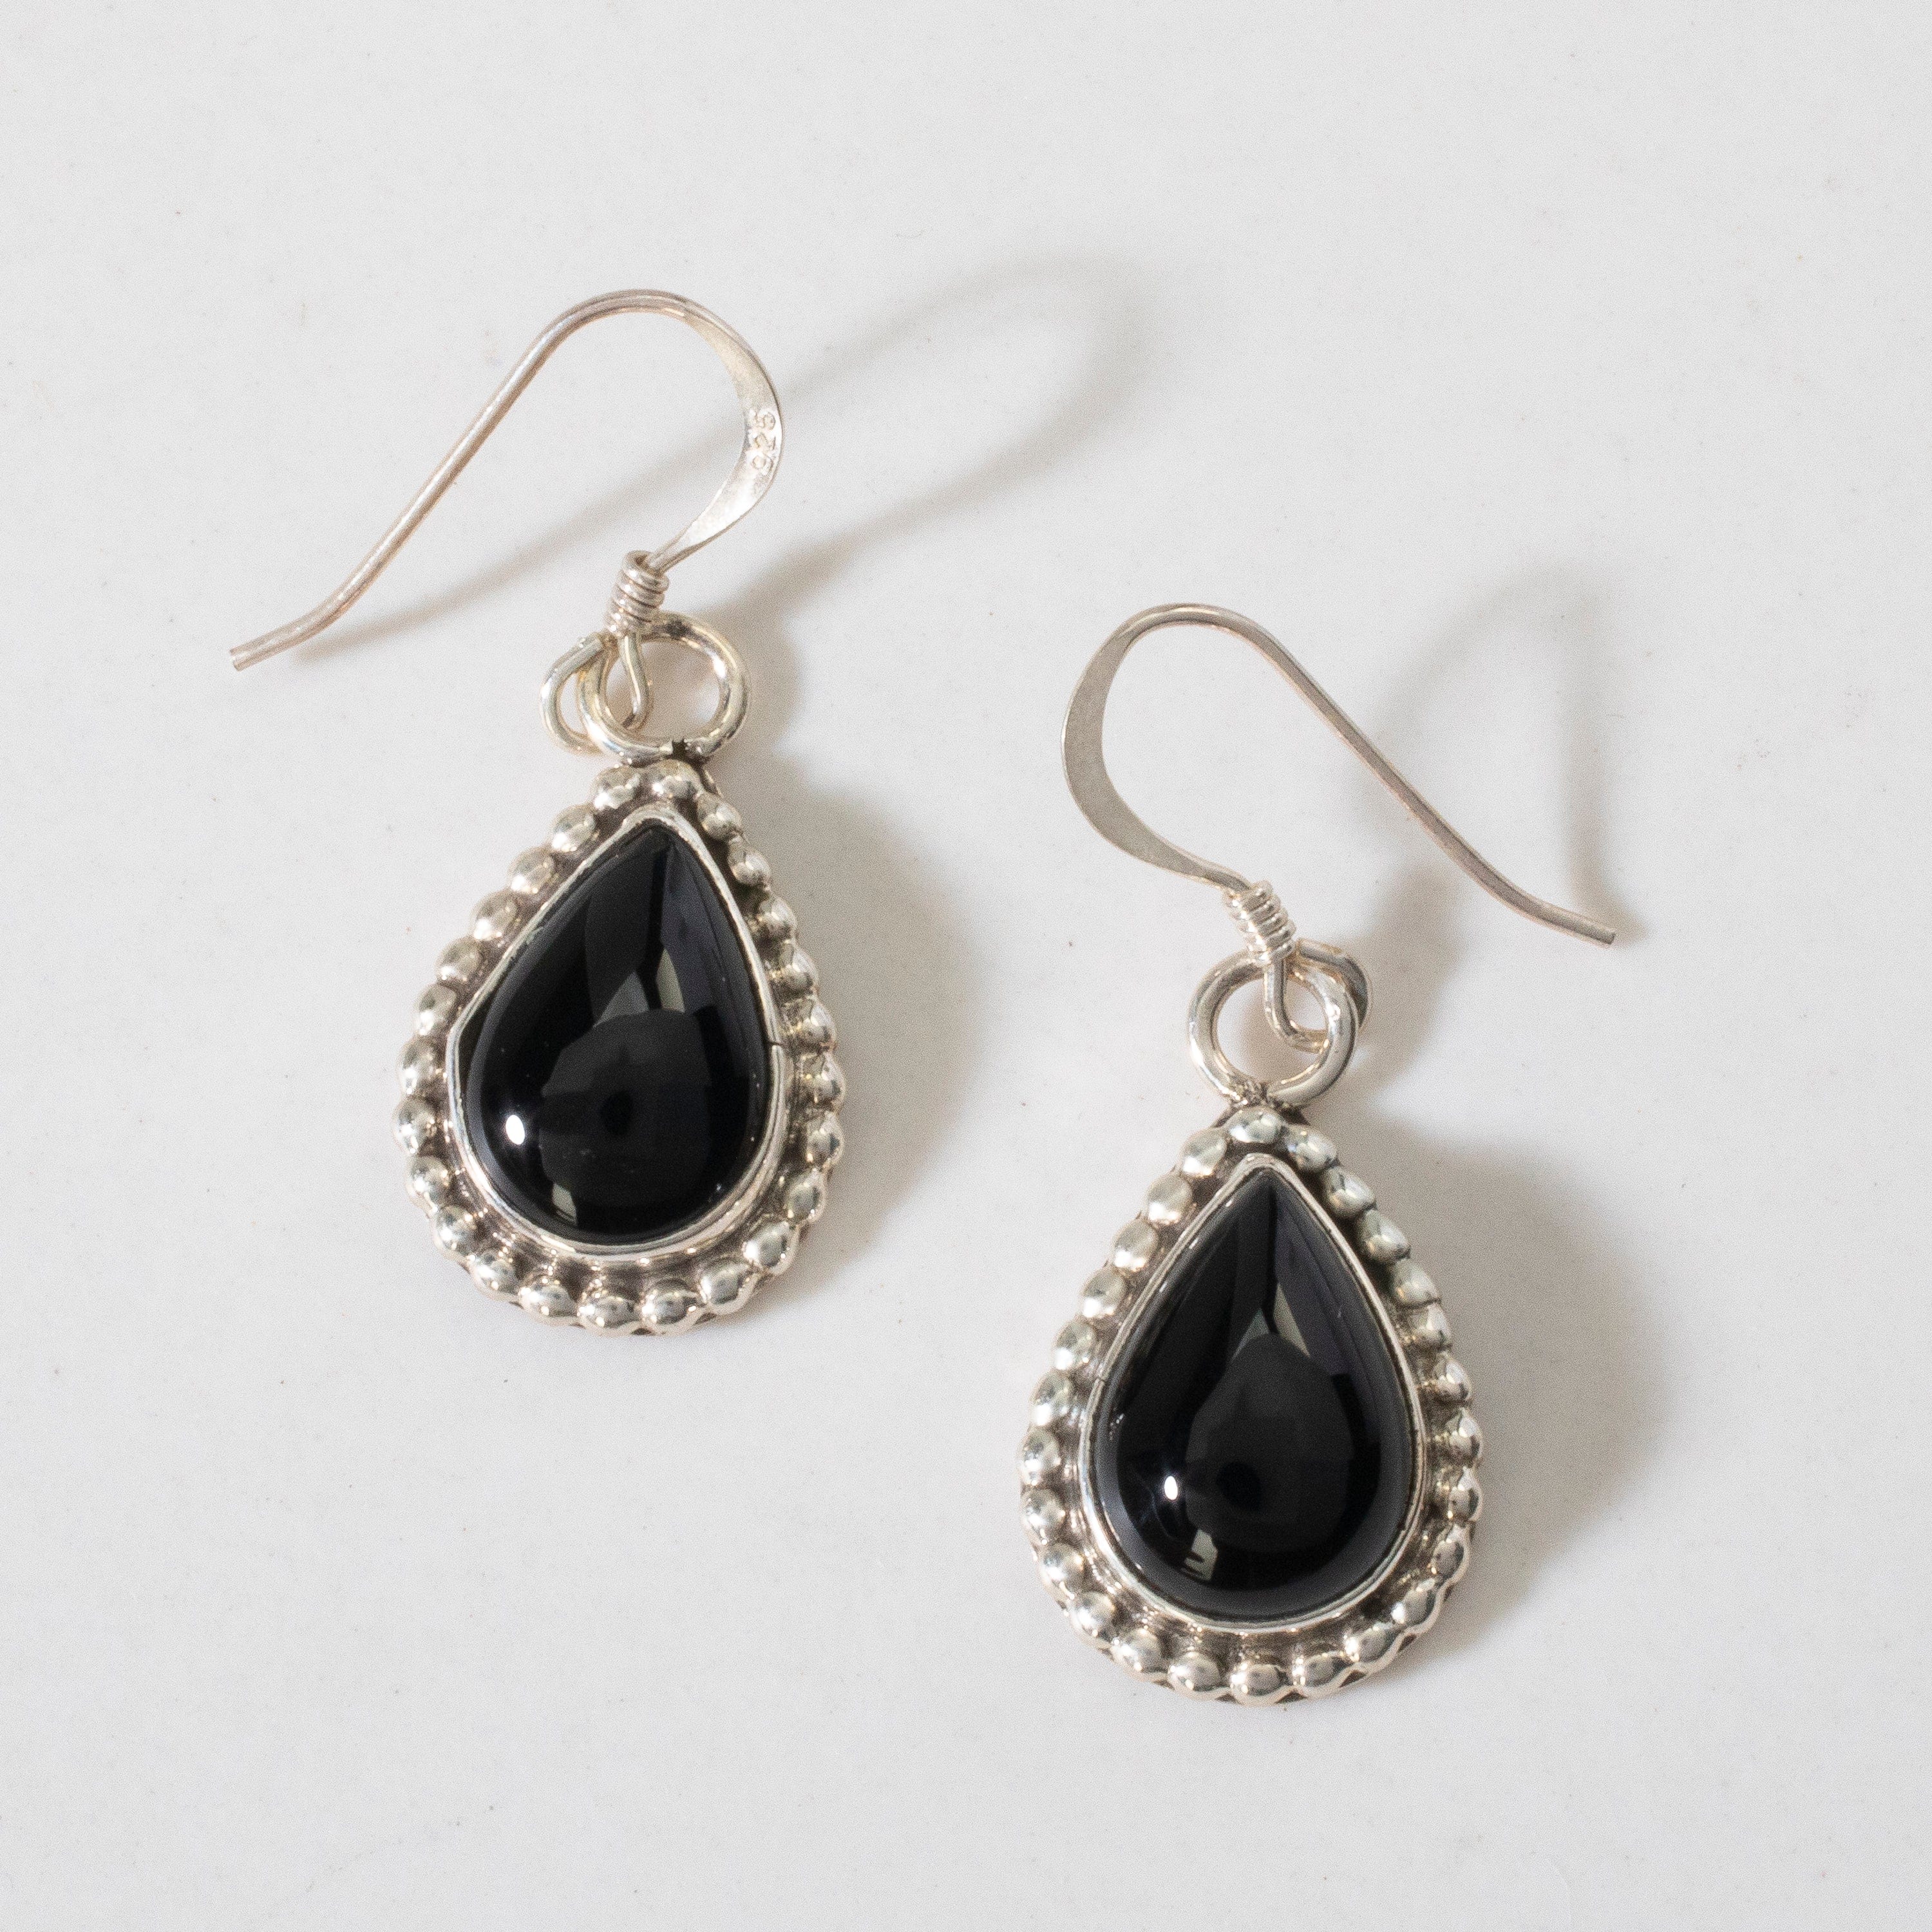 Kalifano Native American Jewelry Black Onyx Teardrop Navajo USA Native American Made 925 Sterling Silver Earrings with French Hook NAE180.002